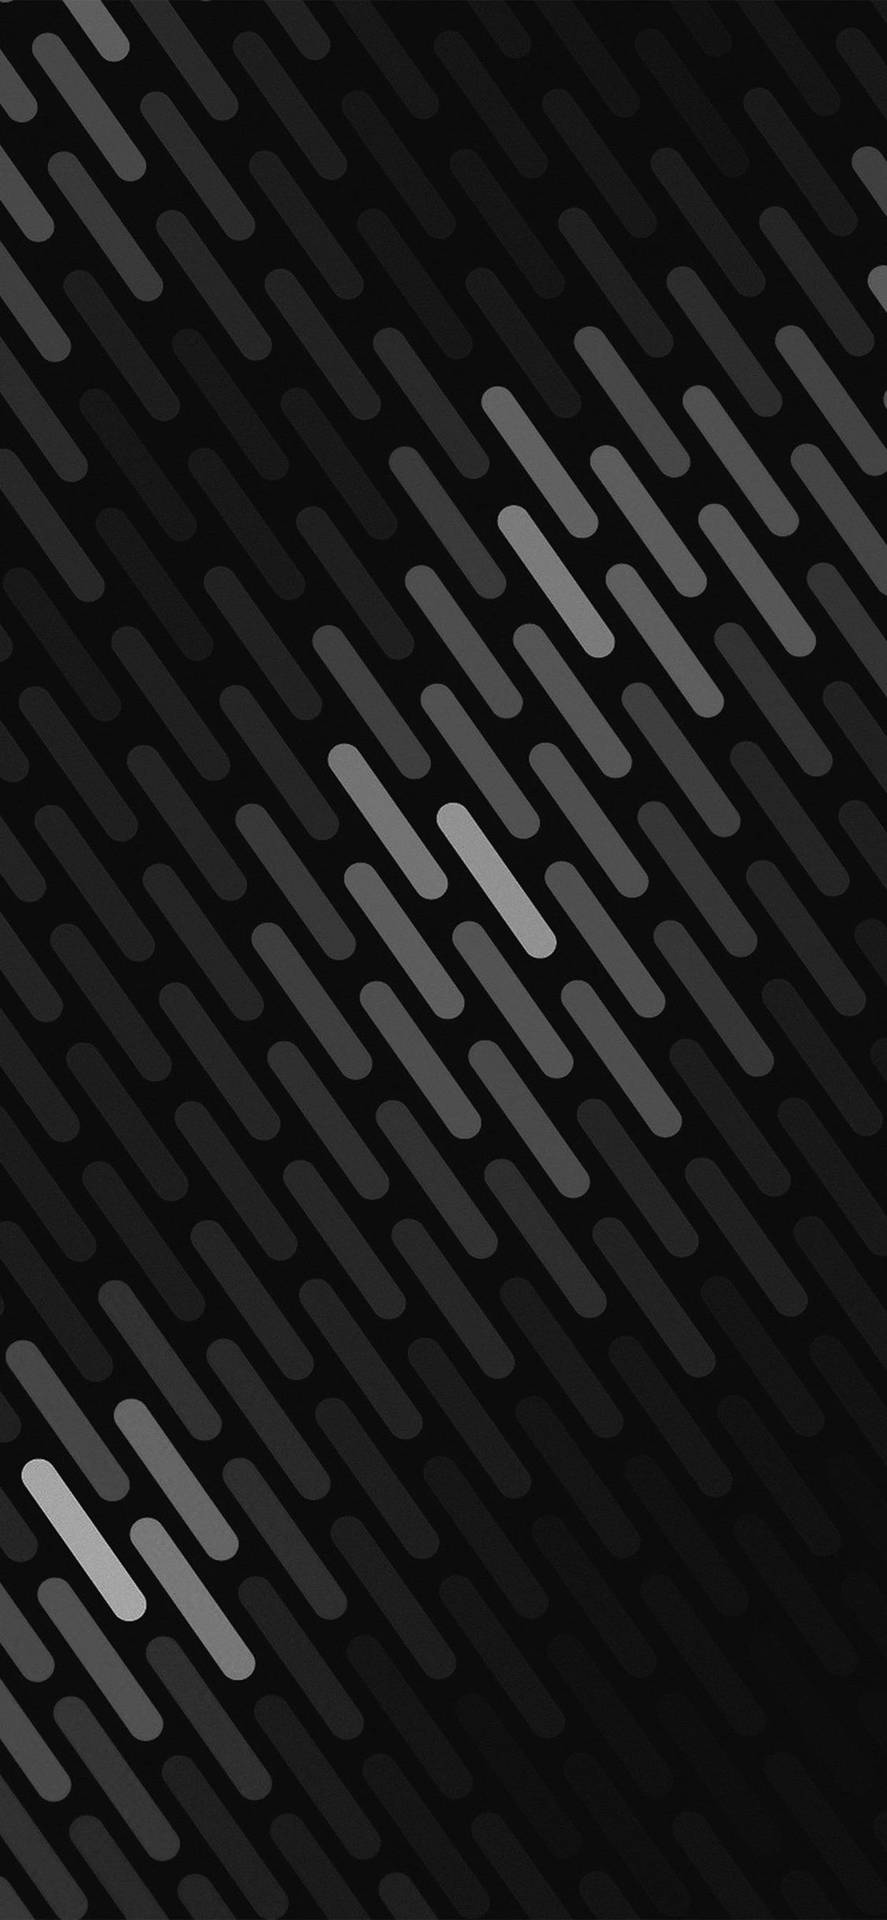 Woven Black And Grey Iphone